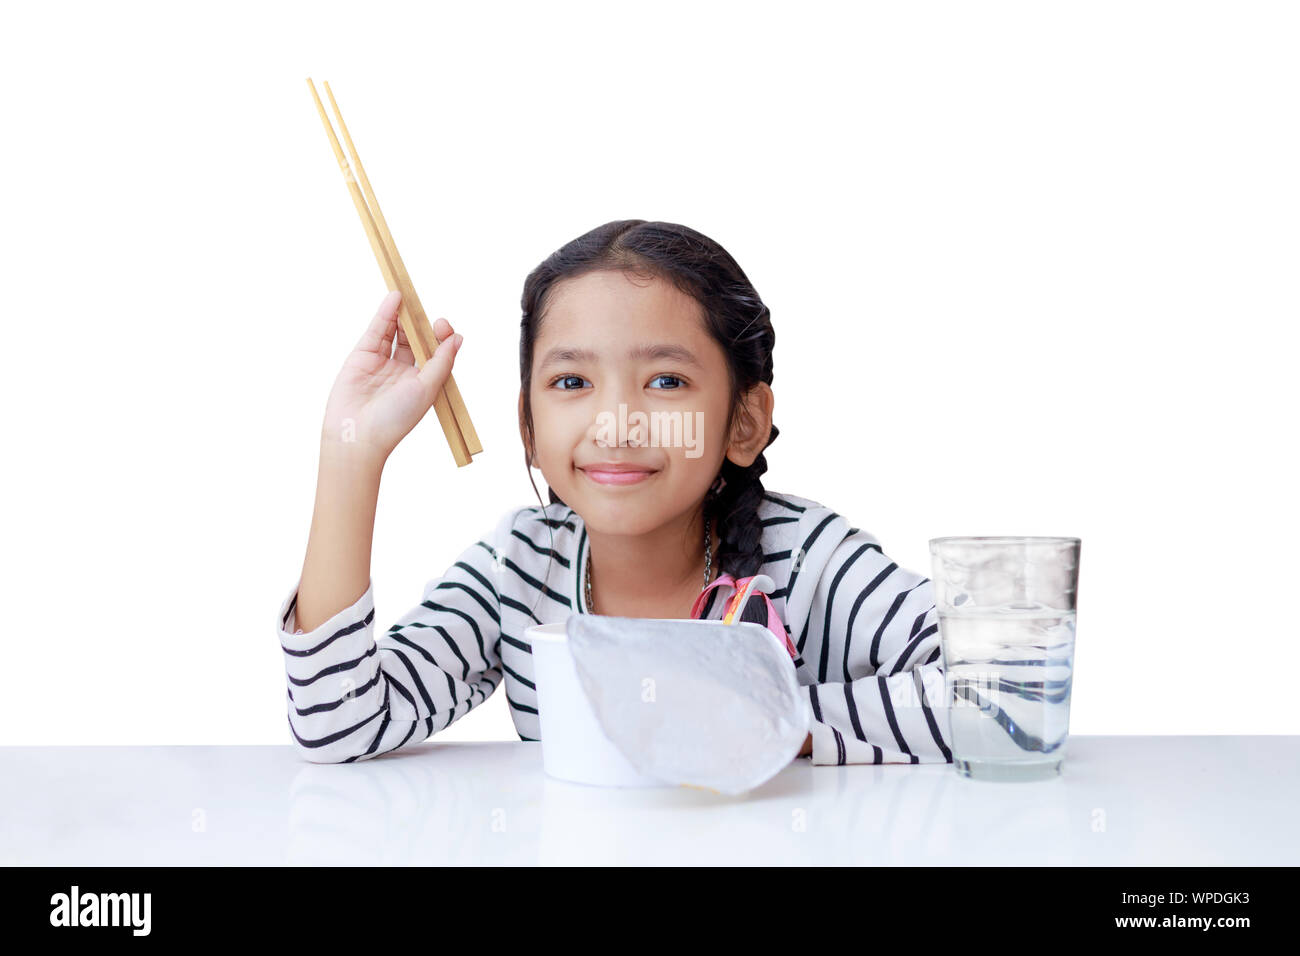 Little Asian girl eat instant noodle and smile with happiness on the white background select focus shallow depth of field Stock Photo